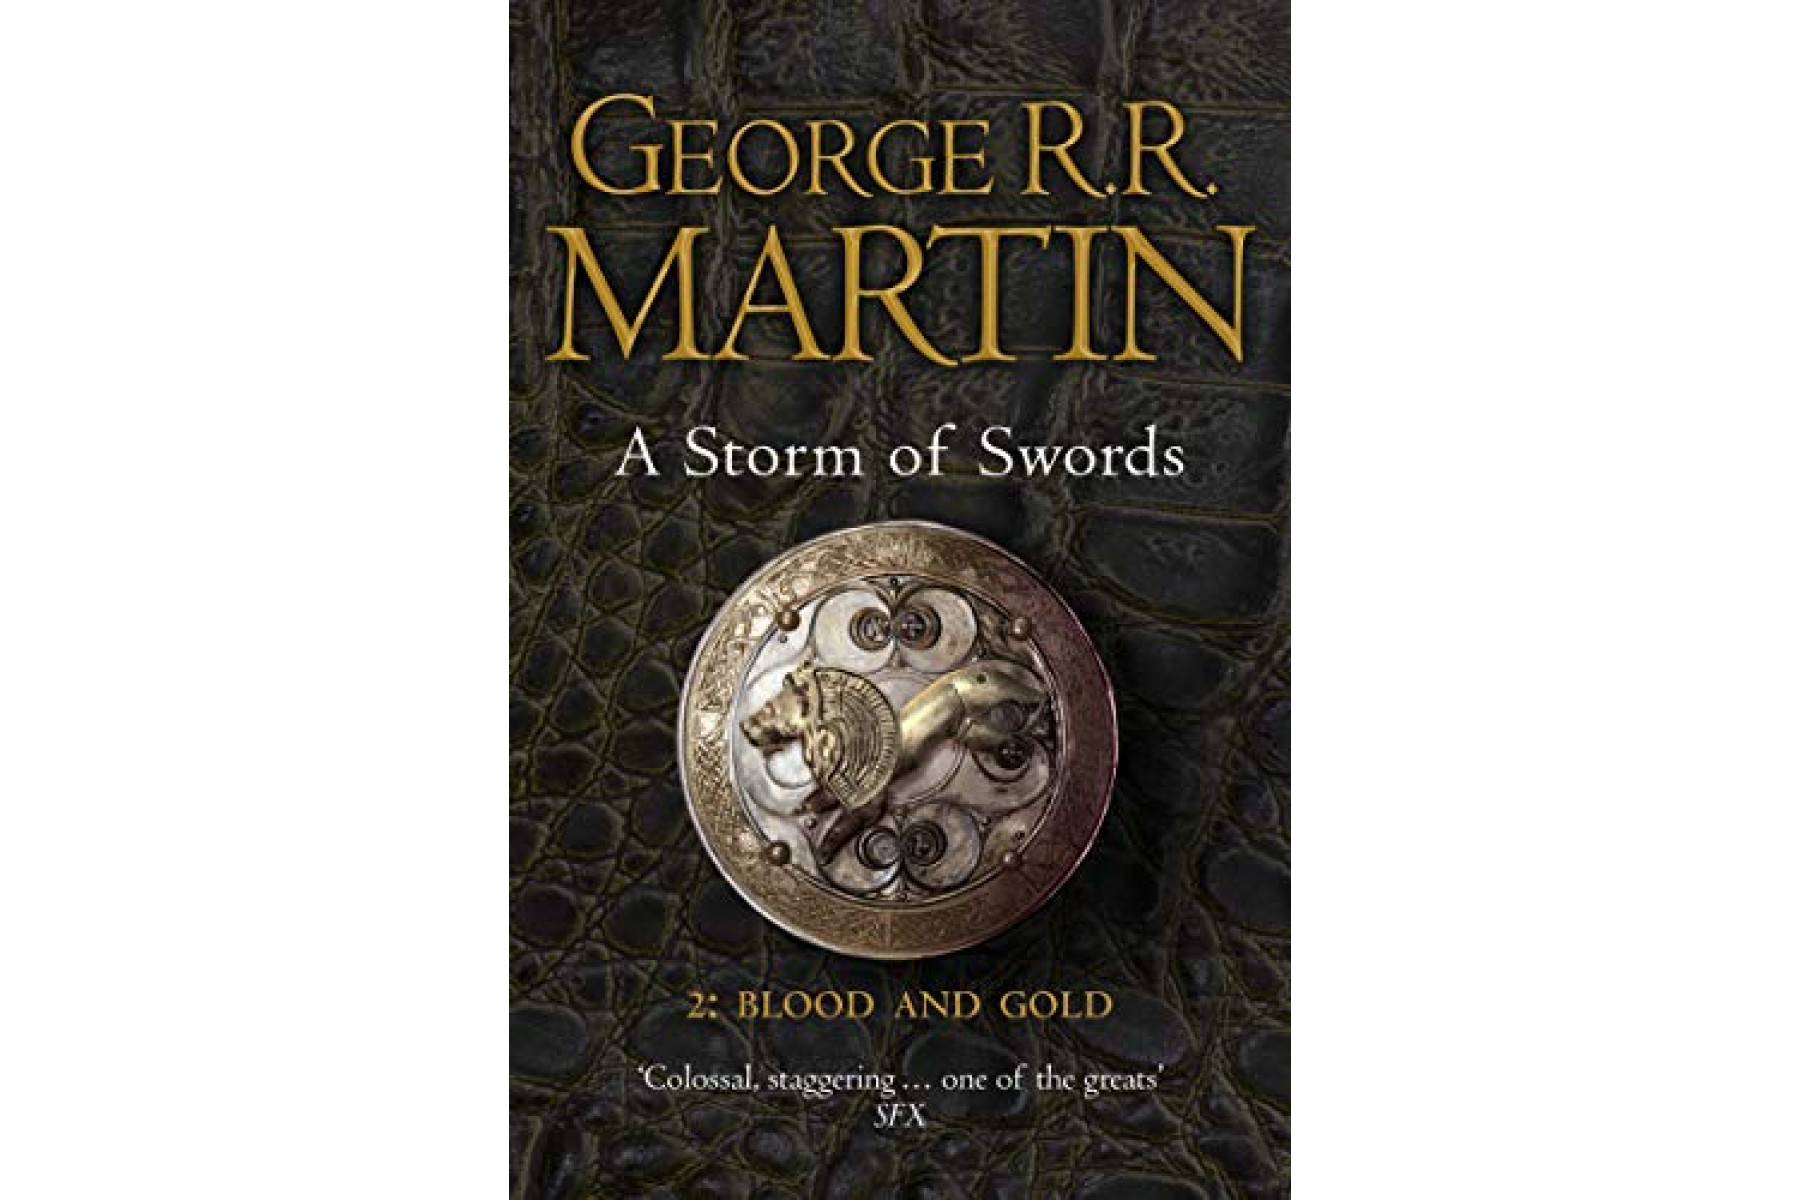 A Storm of Swords: 2 Blood and Gold (A Song of Ice and Fire, Book 3, Part 2)